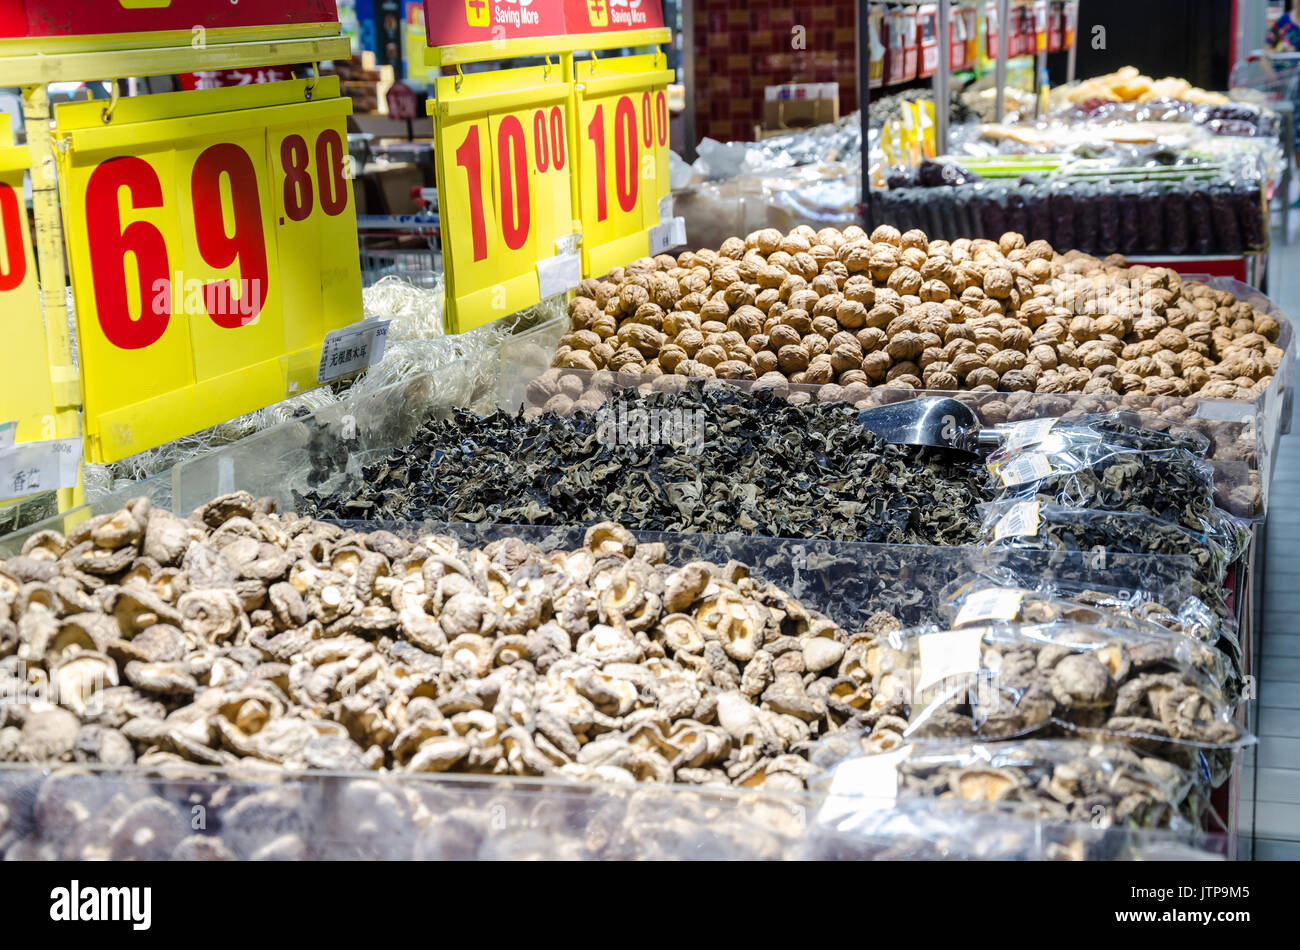 Dried mushrooms and walnuts on sale in a supermarket in shanghai, China. Stock Photo